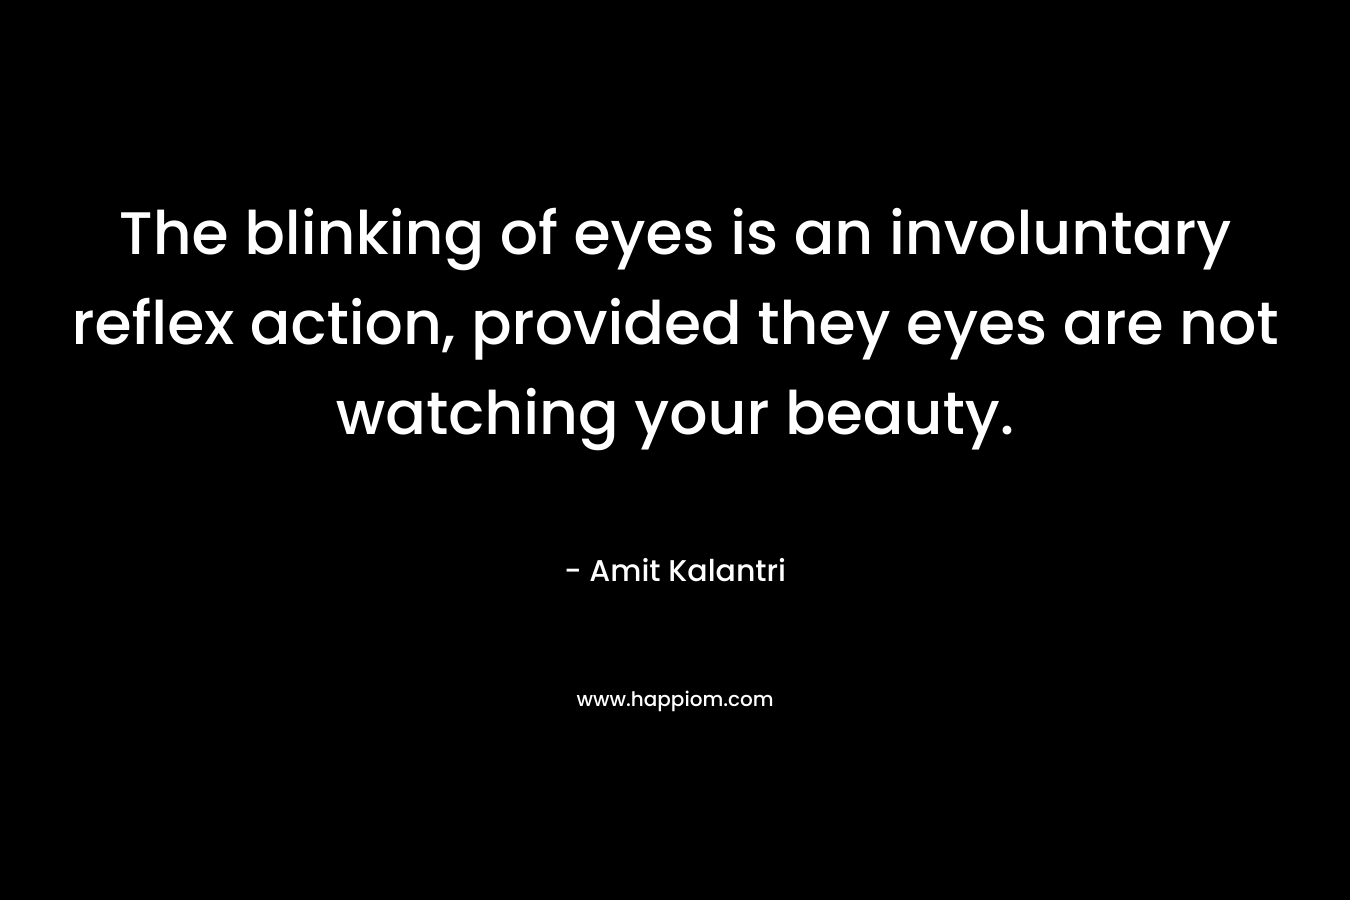 The blinking of eyes is an involuntary reflex action, provided they eyes are not watching your beauty. – Amit Kalantri